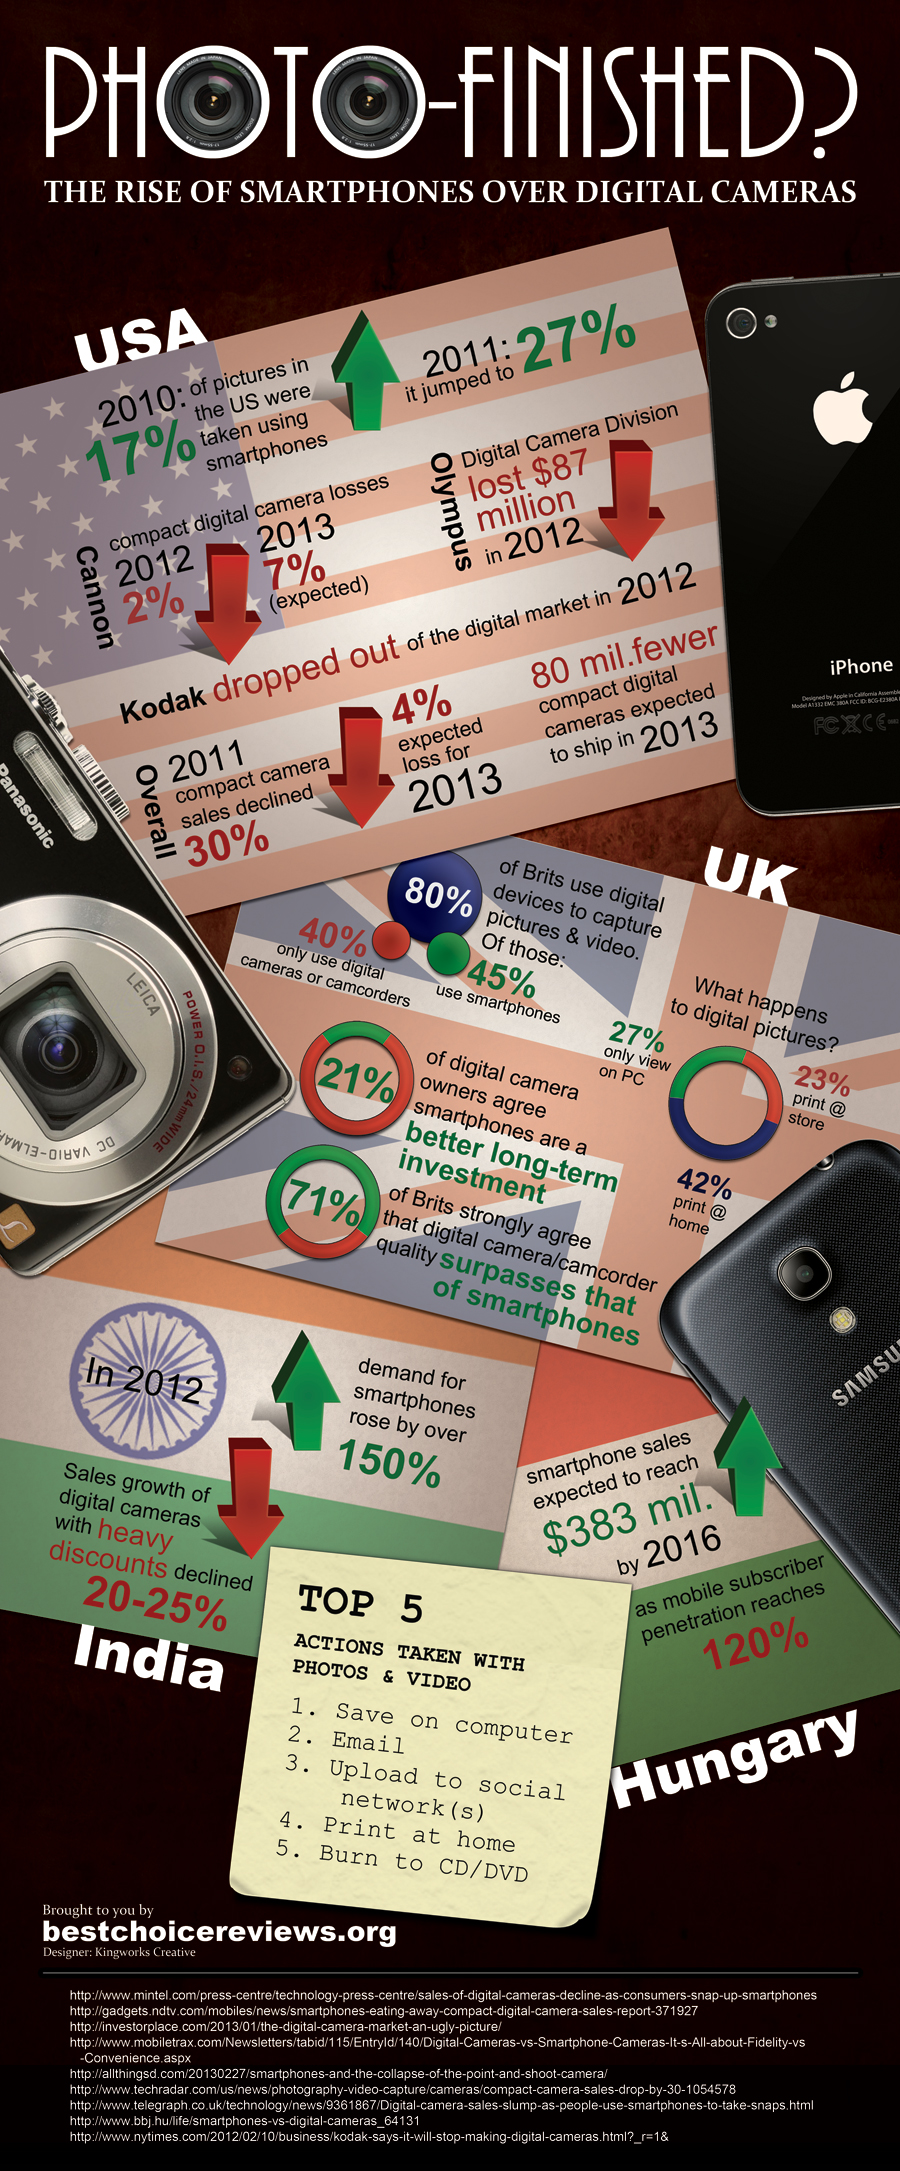 The Rise of Smartphones Over Digital Cameras